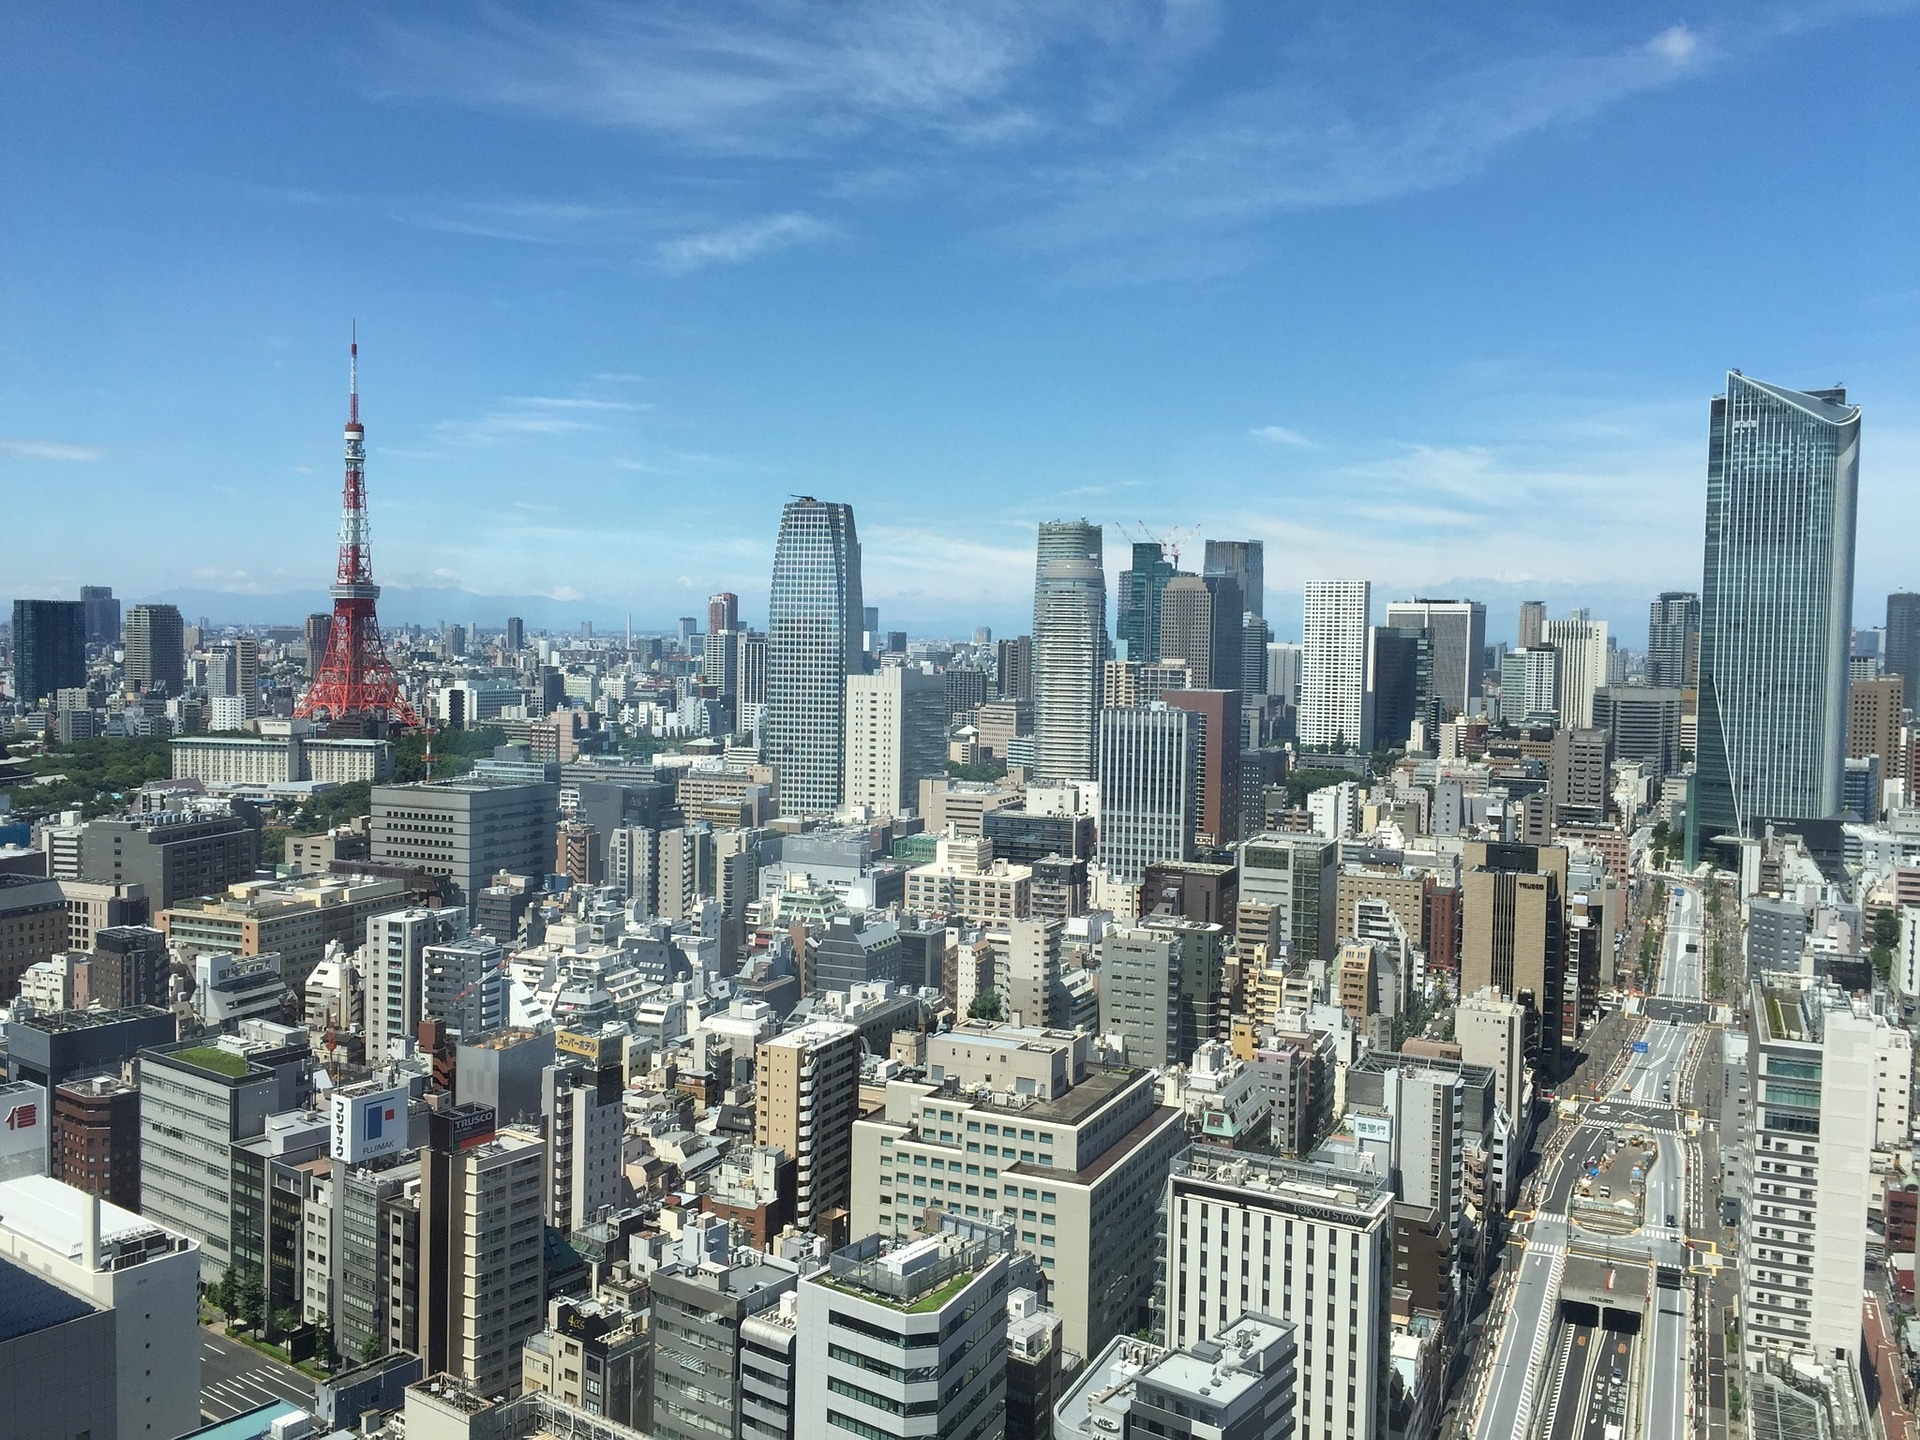 Tokyo is the fifth best city in the world according to the Best Cities